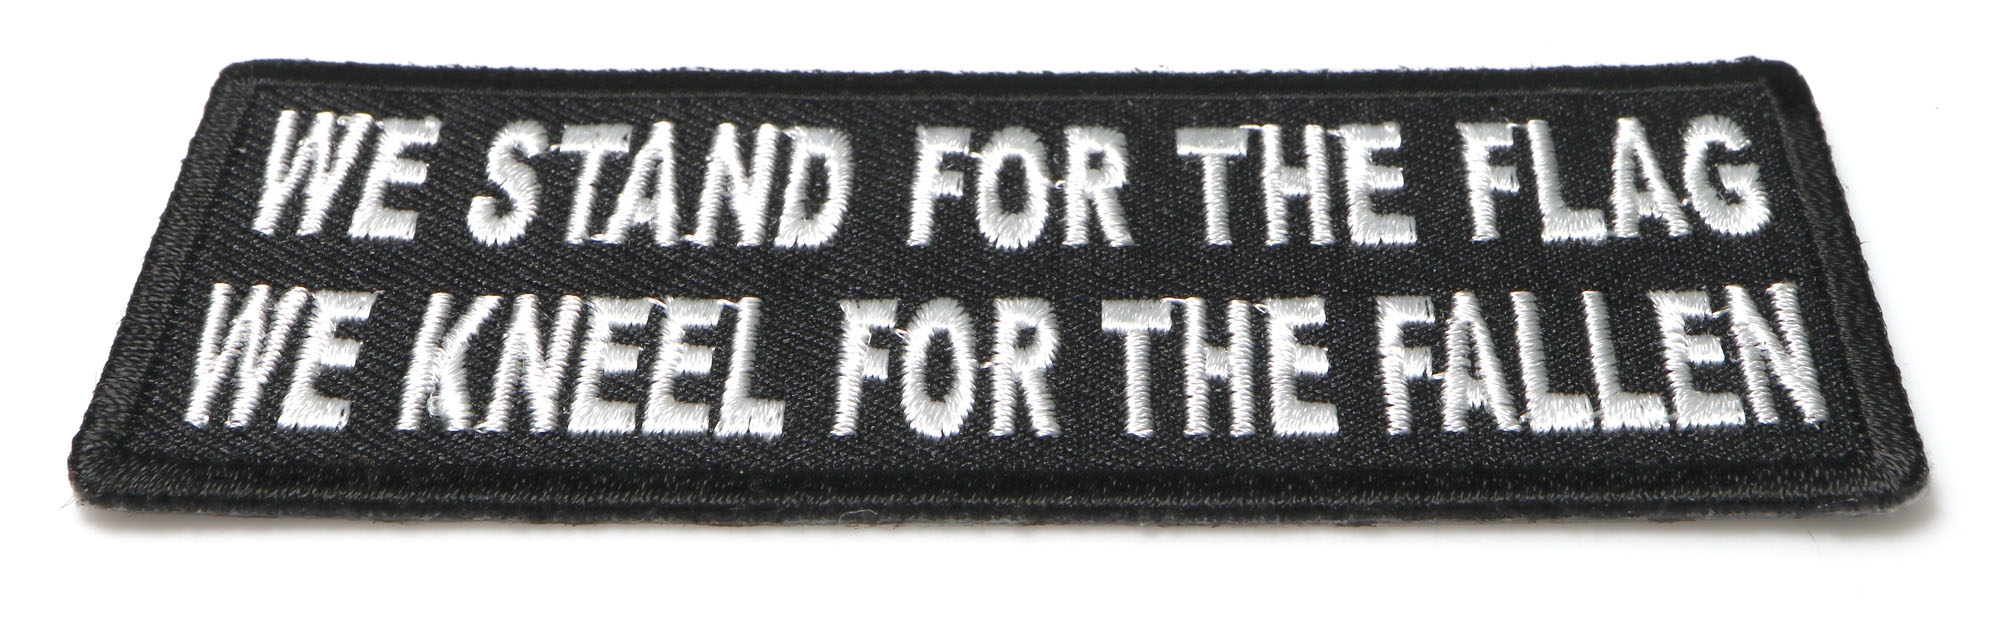 New Military Patches have Arrived